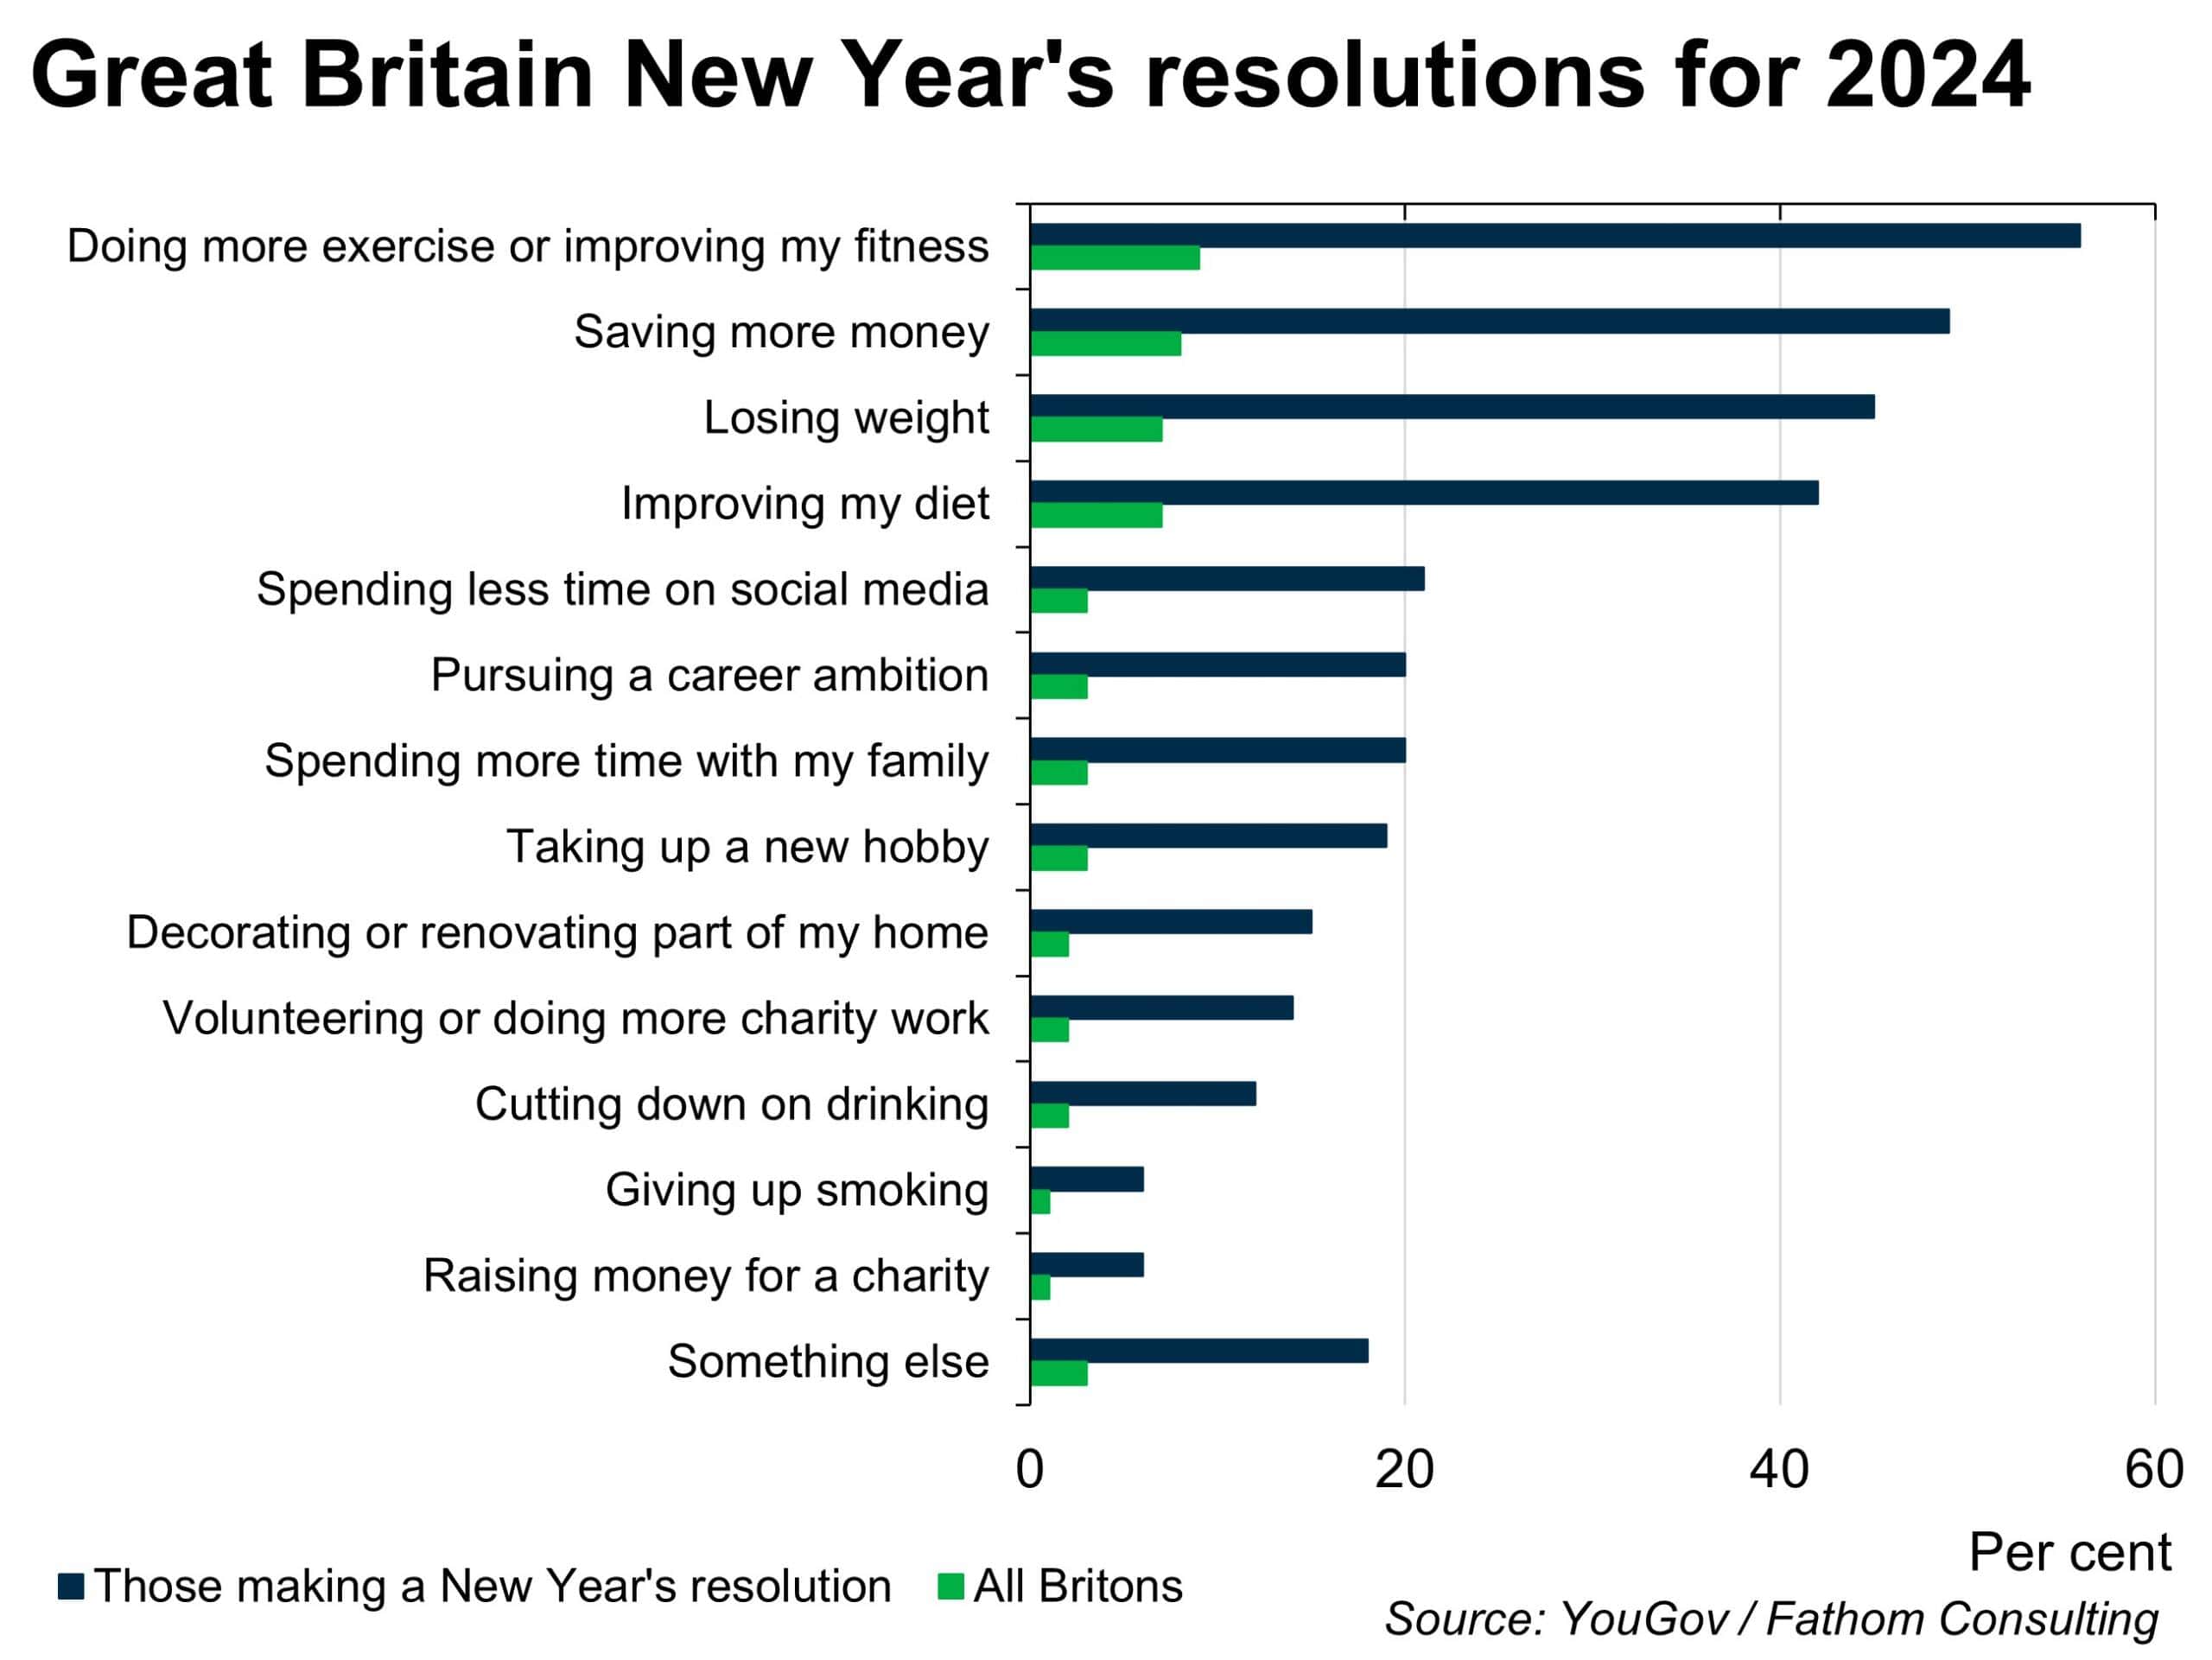 New Year resolutions in the UK